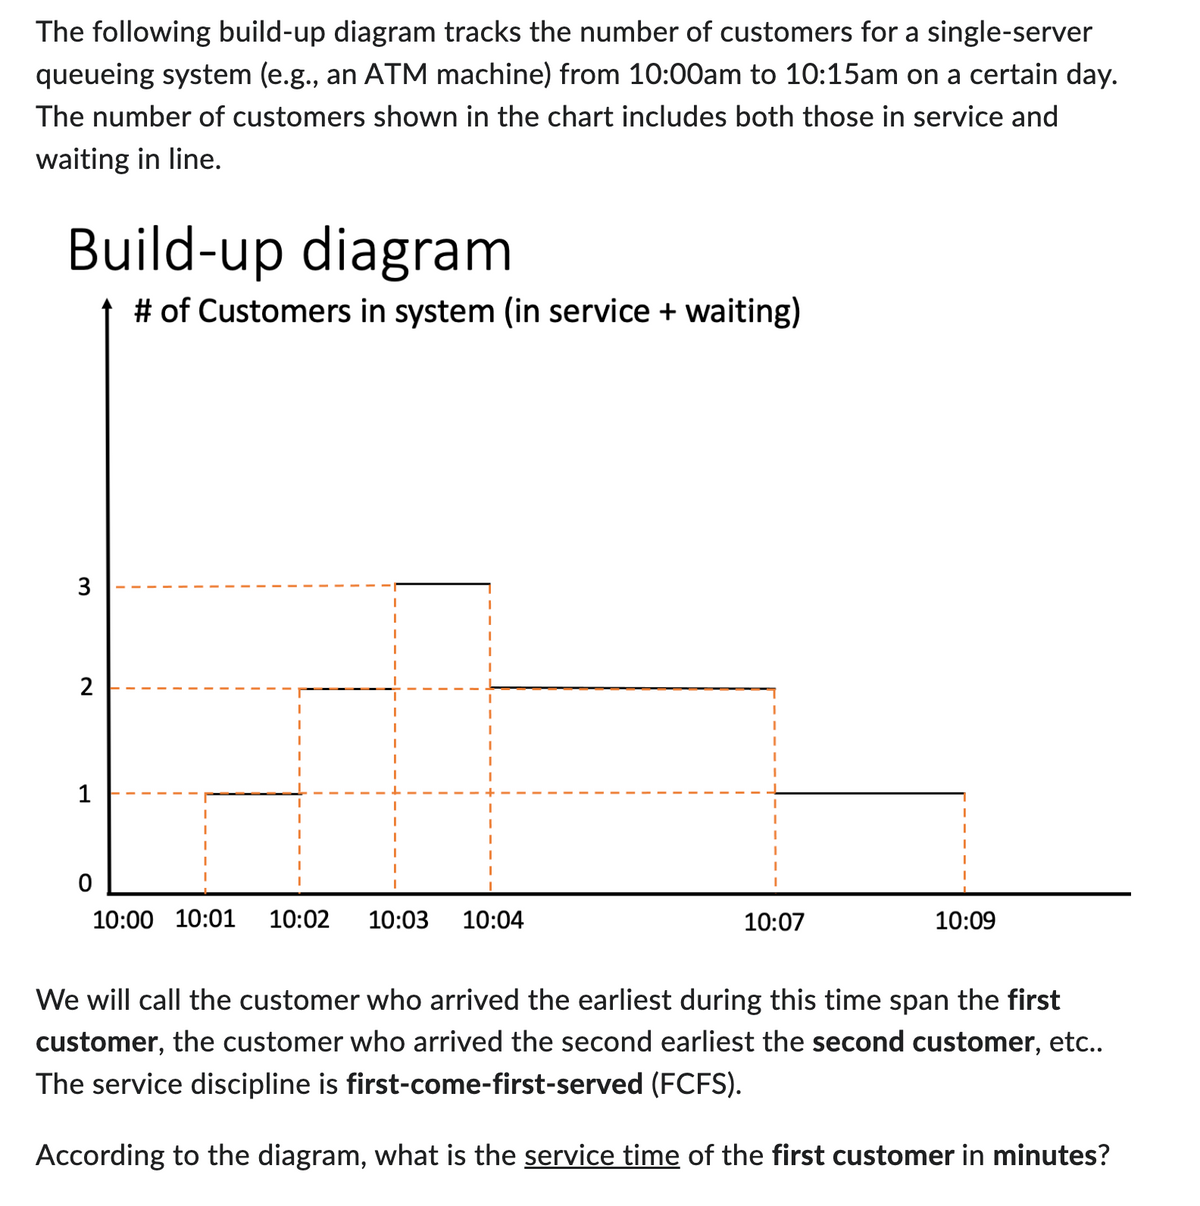 The following build-up diagram tracks the number of customers for a single-server
queueing system (e.g., an ATM machine) from 10:00am to 10:15am on a certain day.
The number of customers shown in the chart includes both those in service and
waiting in line.
Build-up diagram
3
2
1
# of Customers in system (in service + waiting)
0
10:00 10:01 10:02 10:03 10:04
10:07
10:09
We will call the customer who arrived the earliest during this time span the first
customer, the customer who arrived the second earliest the second customer, etc..
The service discipline is first-come-first-served (FCFS).
According to the diagram, what is the service time of the first customer in minutes?